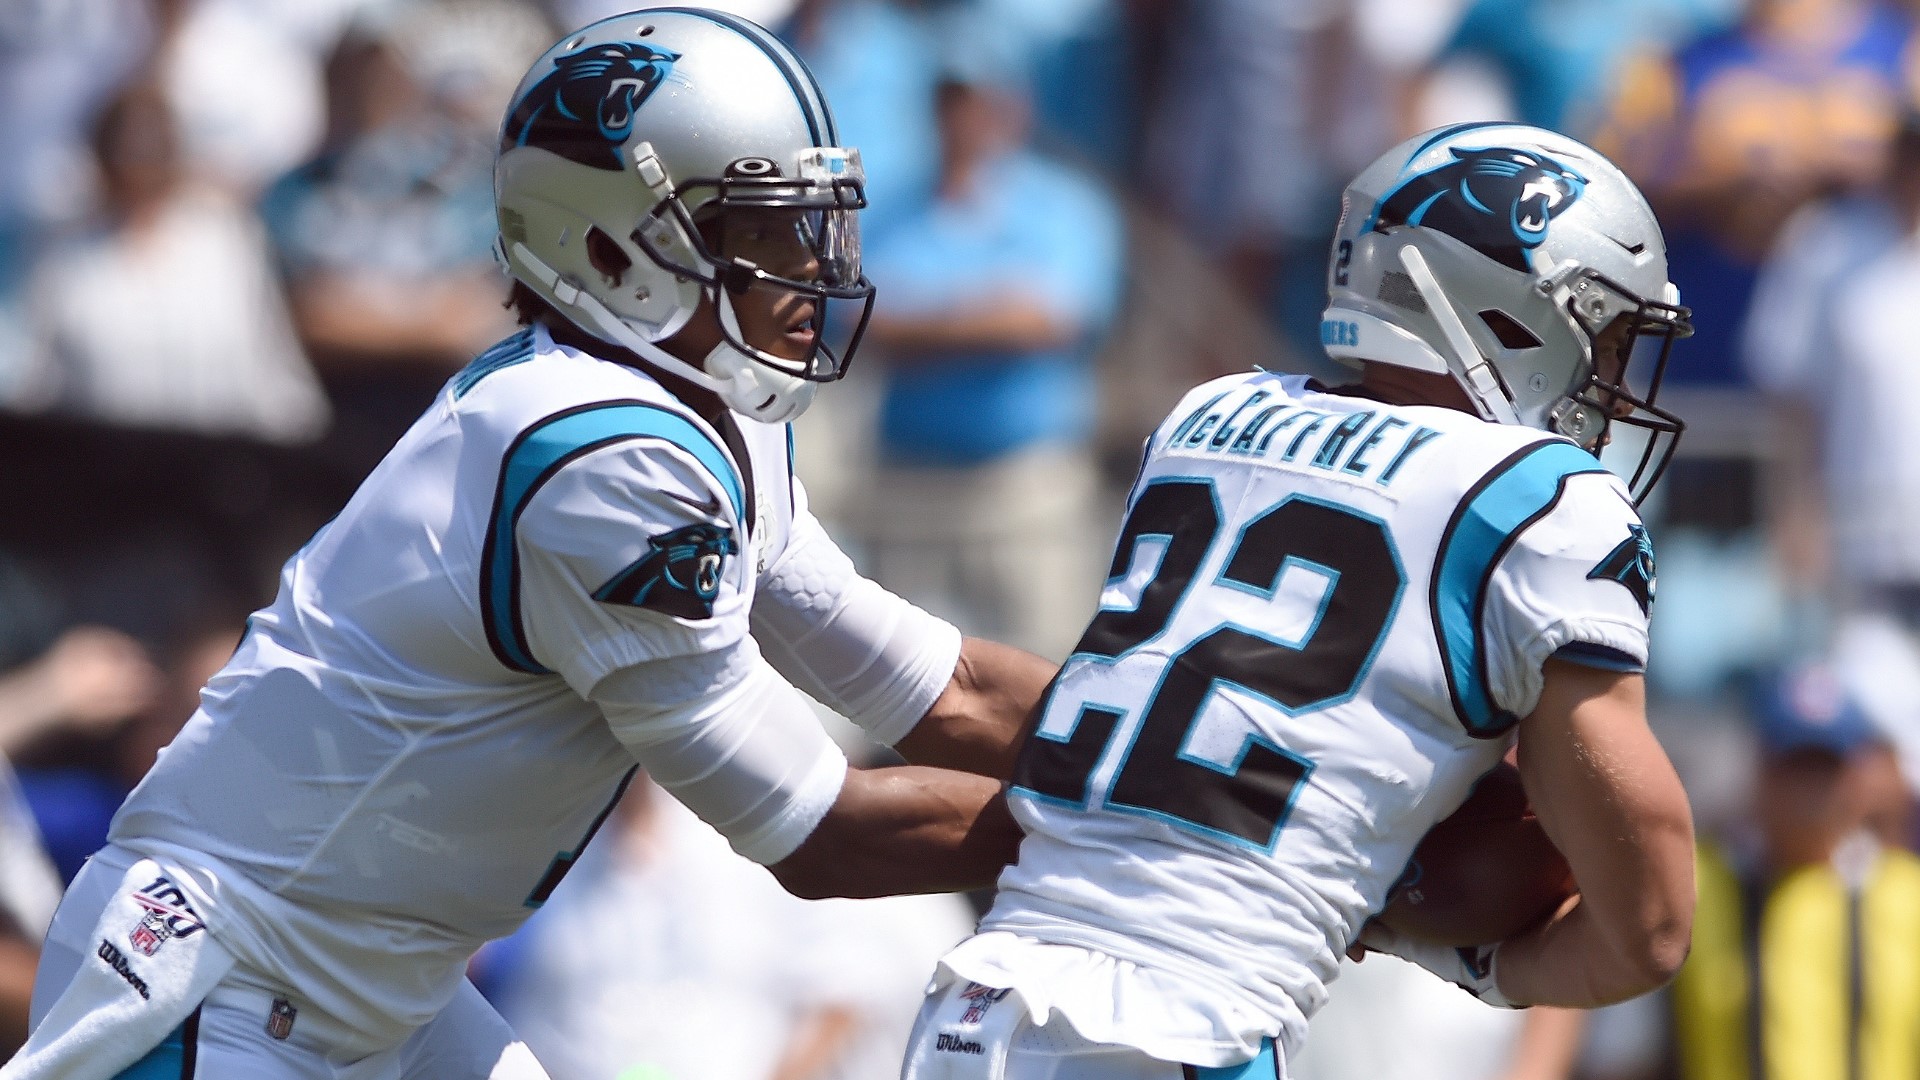 The Carolina Panthers opened the 2019 season with a disappointing 30-27 home loss to the Los Angeles Rams. Cam Newton struggled and wide receiver DJ Moore lost a fumble in the first half.